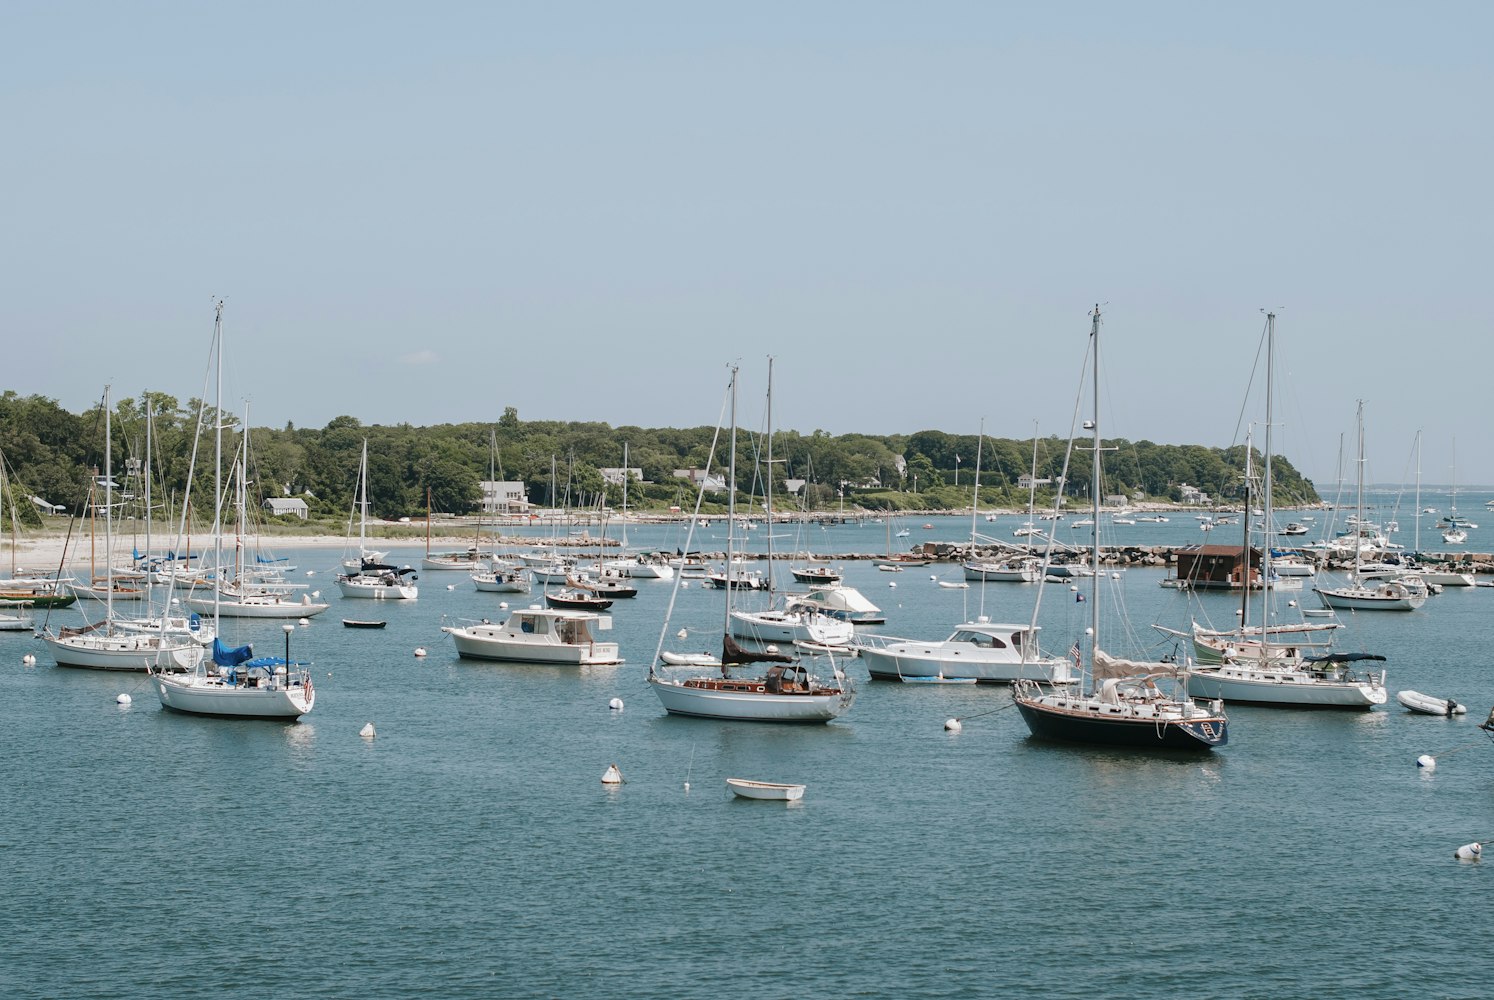 As an island, Martha’s Vineyard has a diverse variety of living harbors and today we’re talking about three of our favorites: Edgartown, Menemsha, and Oak Bluffs Harbor.